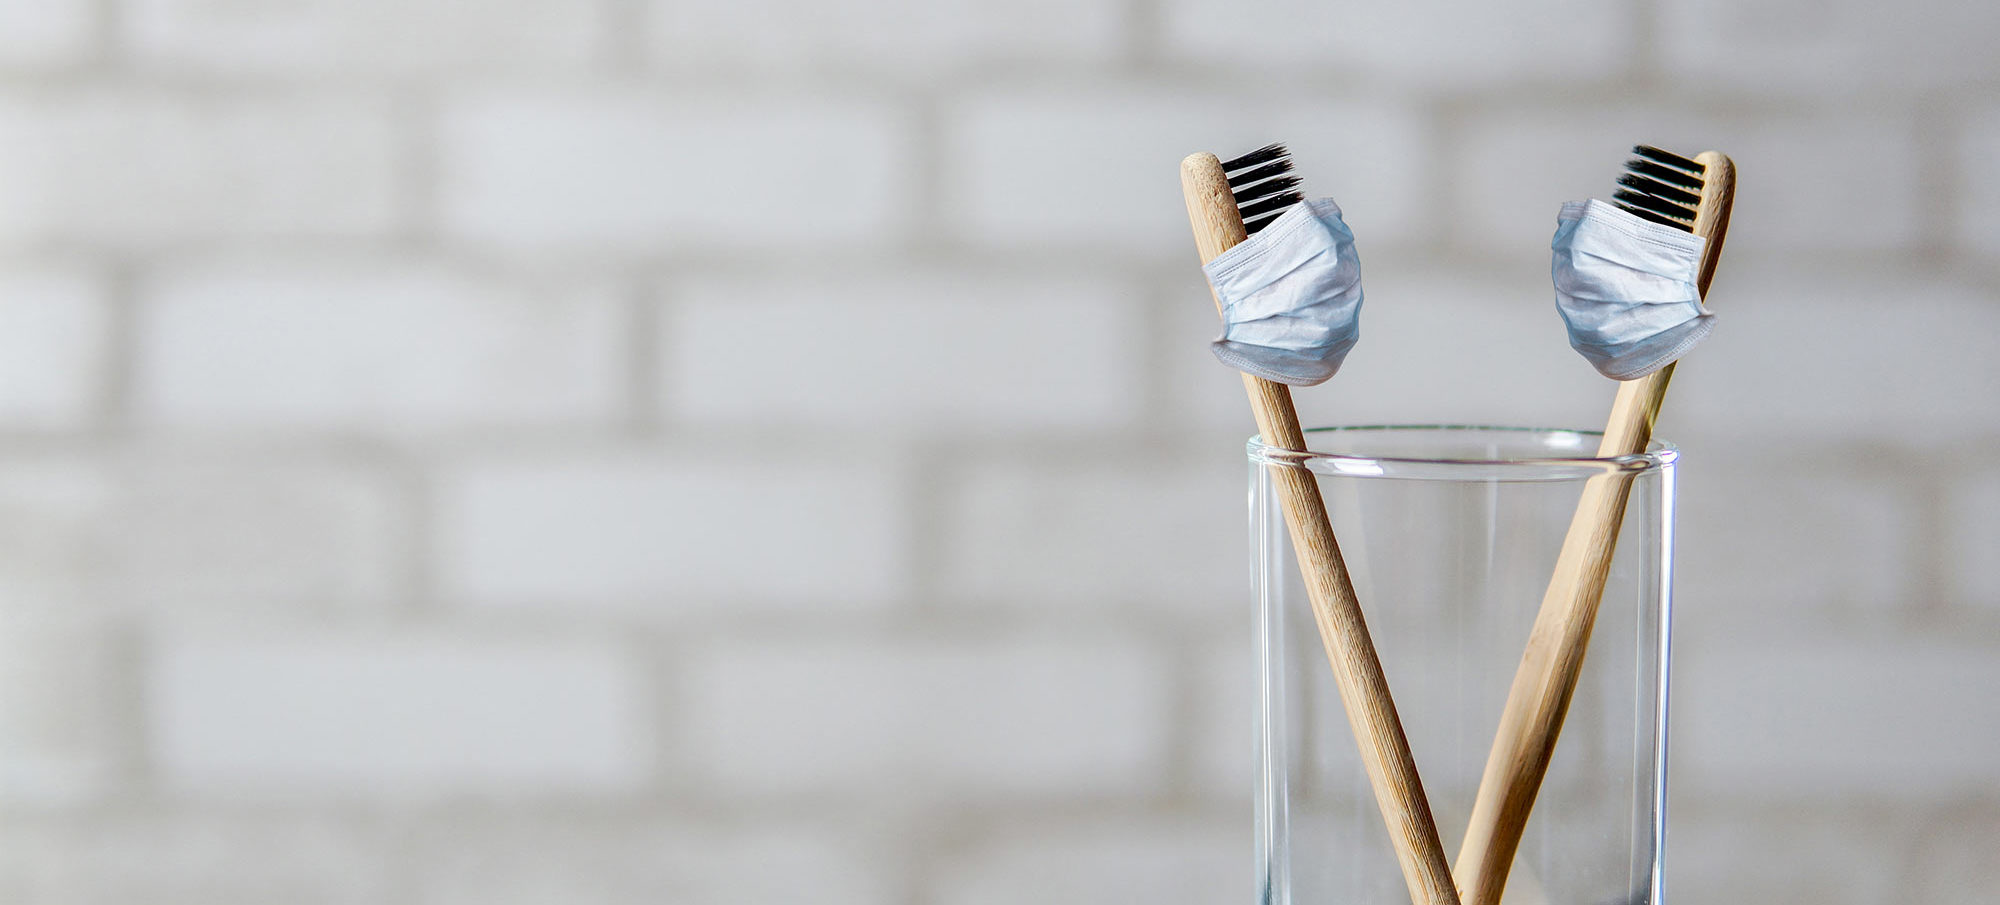 Professor Martin Addy and Dr Victoria Sampson look at the connection between good oral hygiene practices and COVID-19